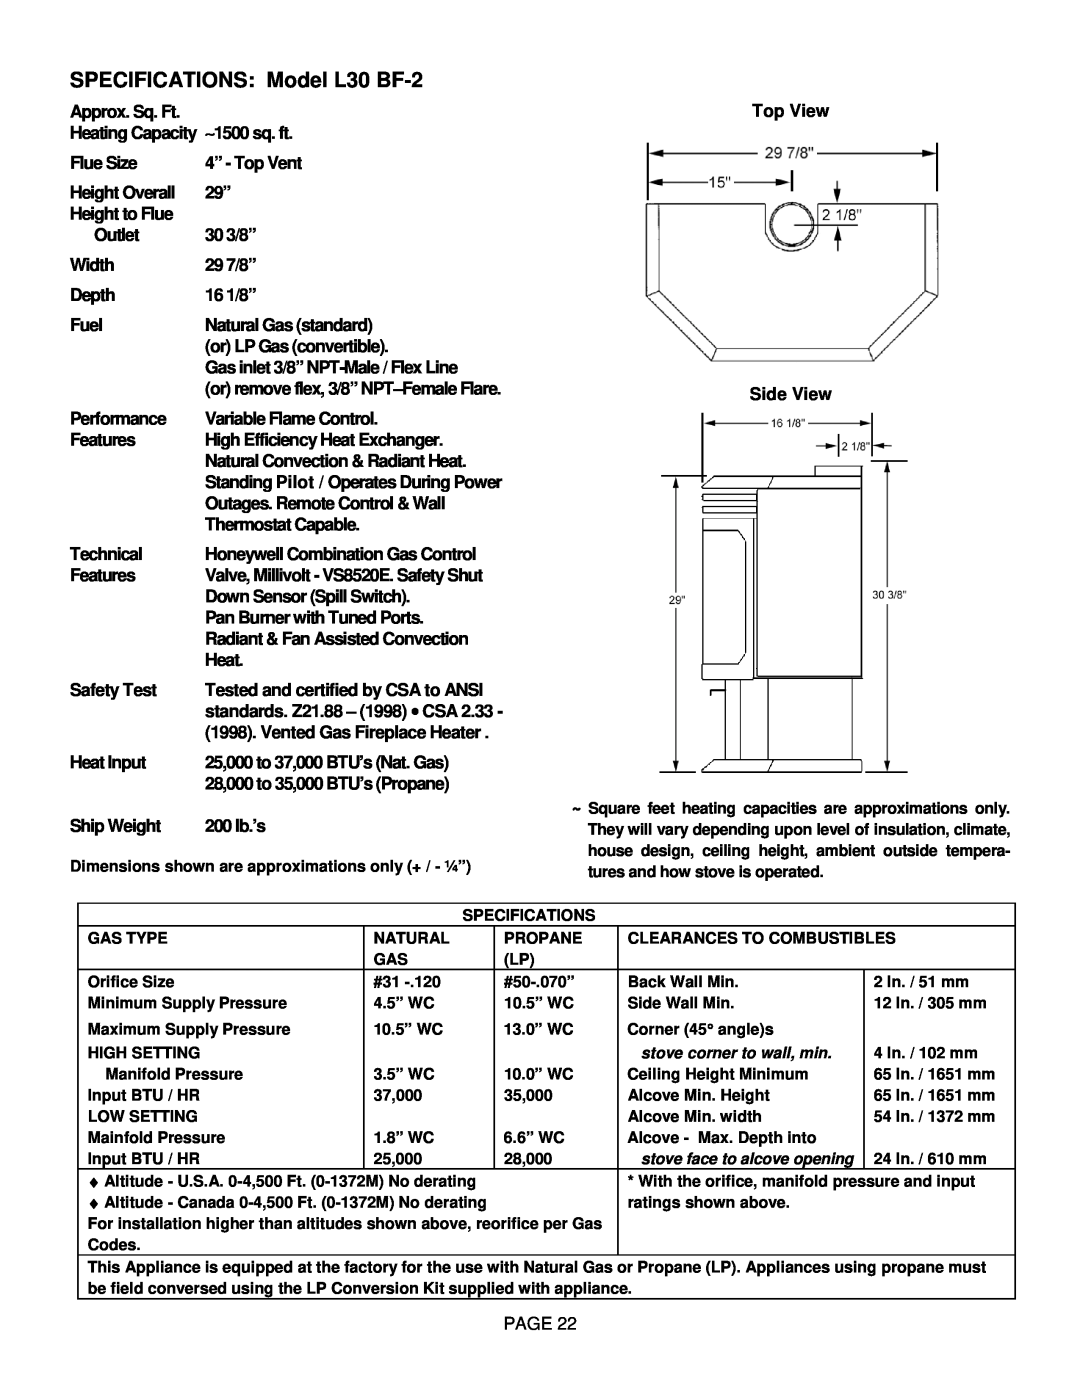 Lenoxx Electronics SPECIFICATIONS Model L30 BF-2, Approx. Sq. Ft Heating Capacity ∼ 1500 sq. ft, Flue Size, Outlet 